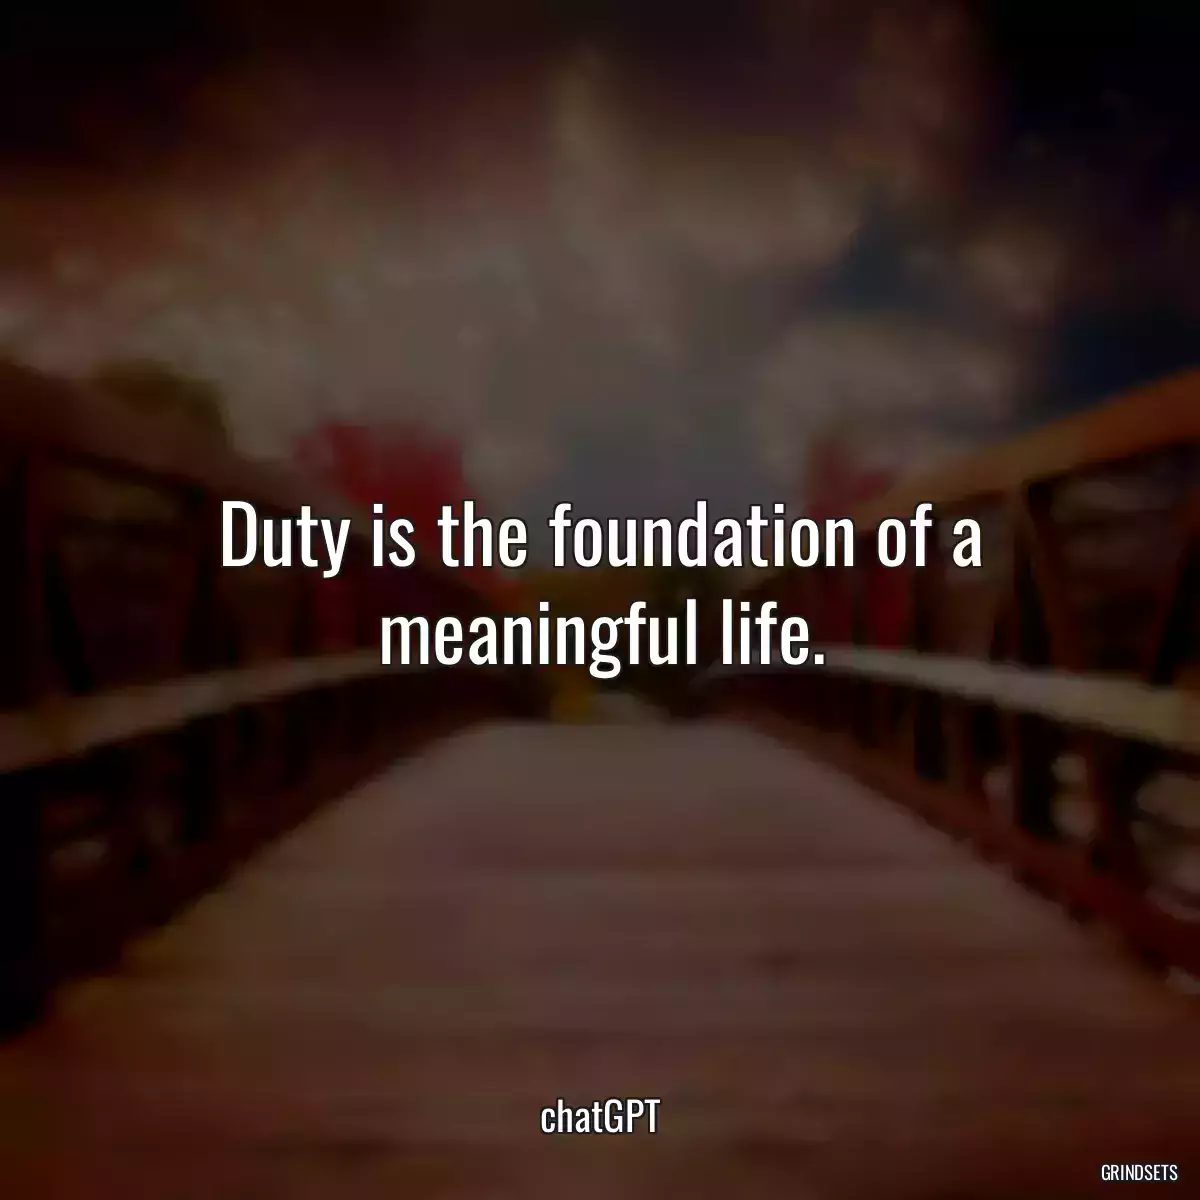 Duty is the foundation of a meaningful life.